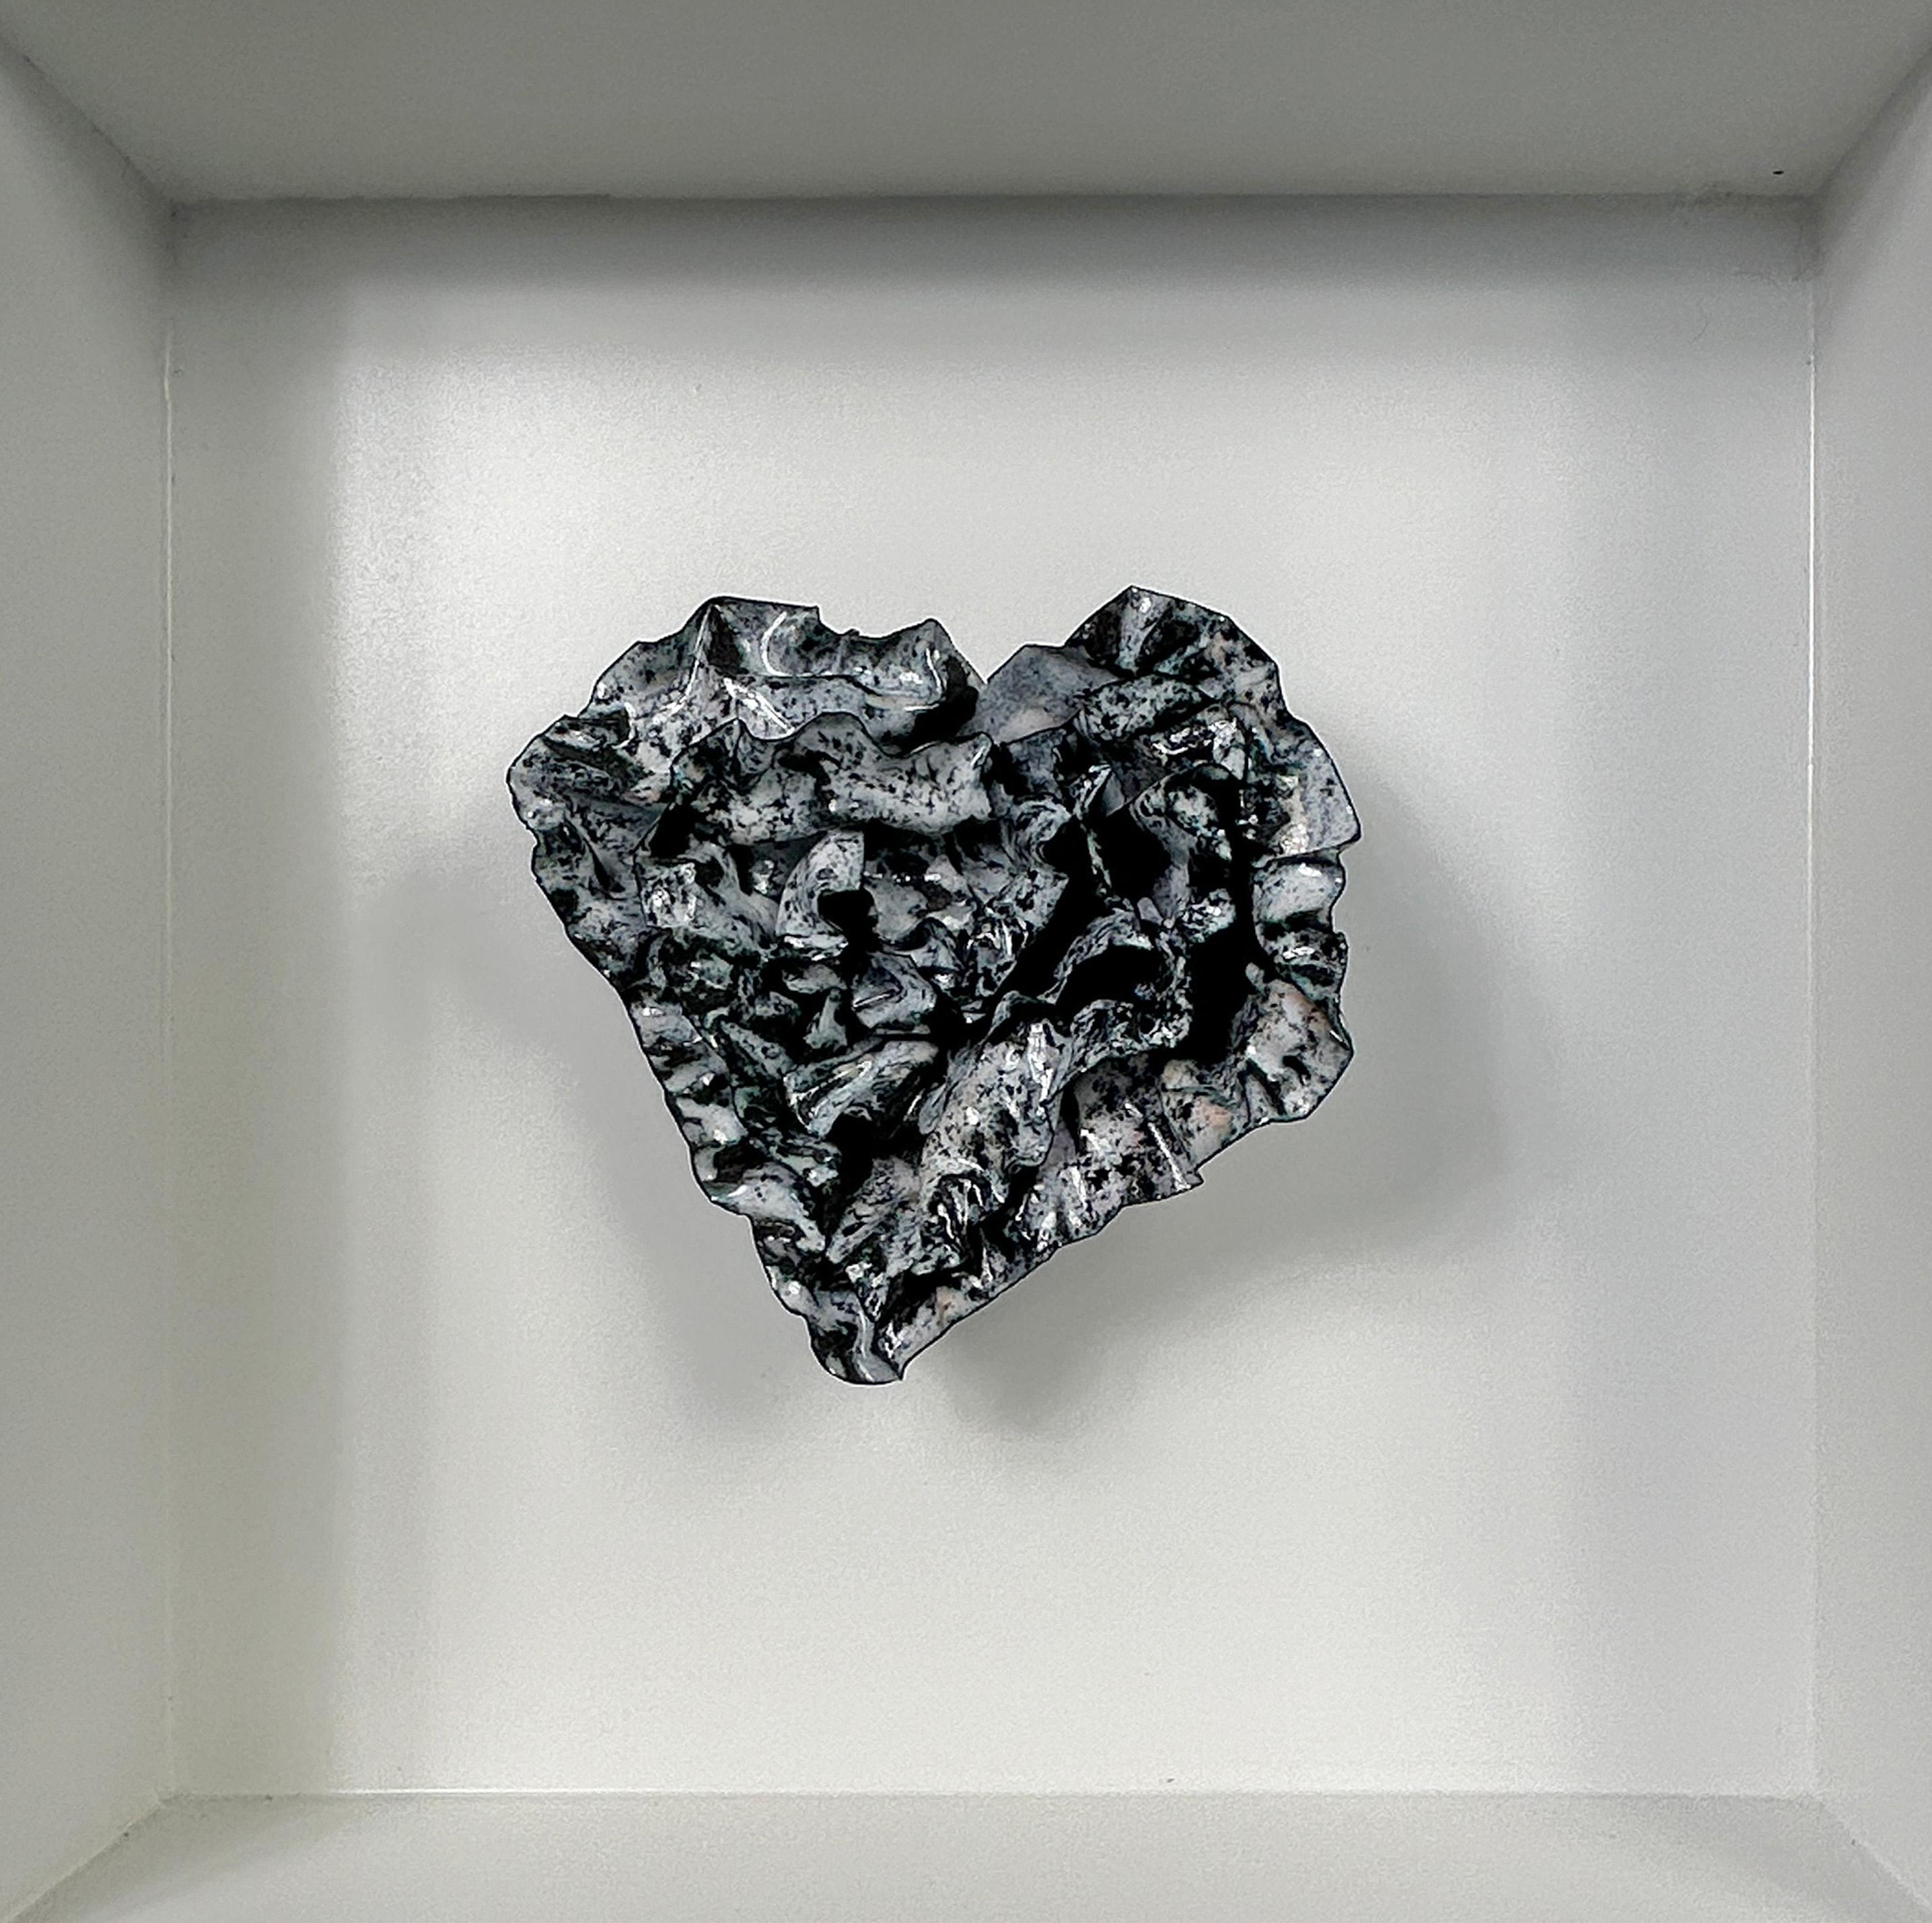 Inquisitive Heart is an intriguing abstract heart sculpture that challenges perception and ignites curiosity. Sculpted by artist Sherry Been.
At first glance, one may question whether it's black on white or white on black, but the answer lies within